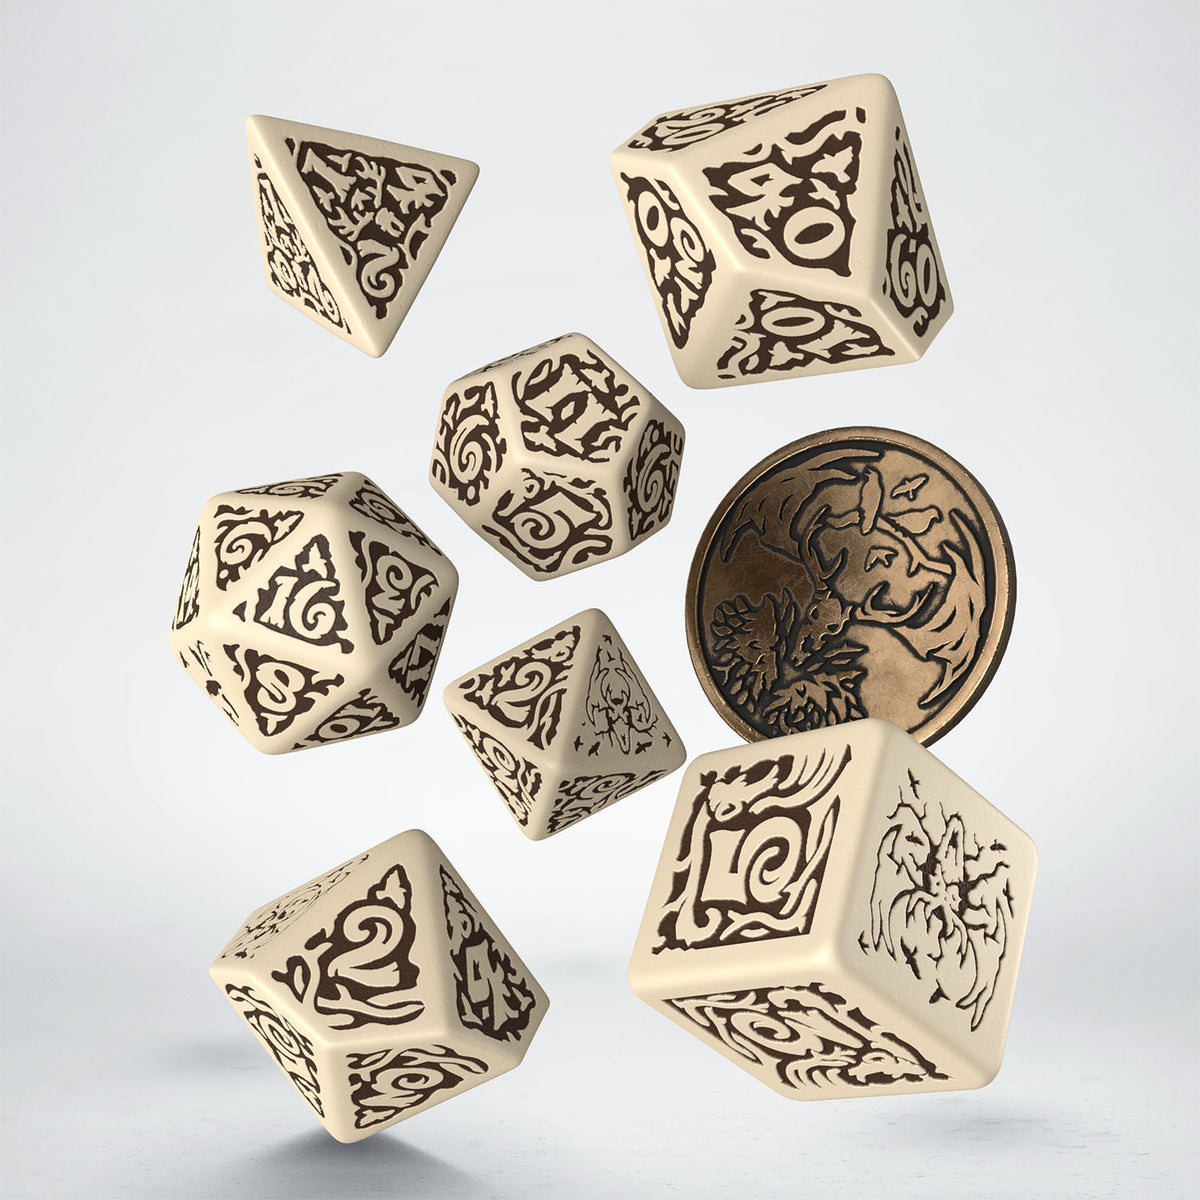 Q Workshop - The Witcher Dice Set Leshen - The Master of Crows Dice Set 7 With Coin